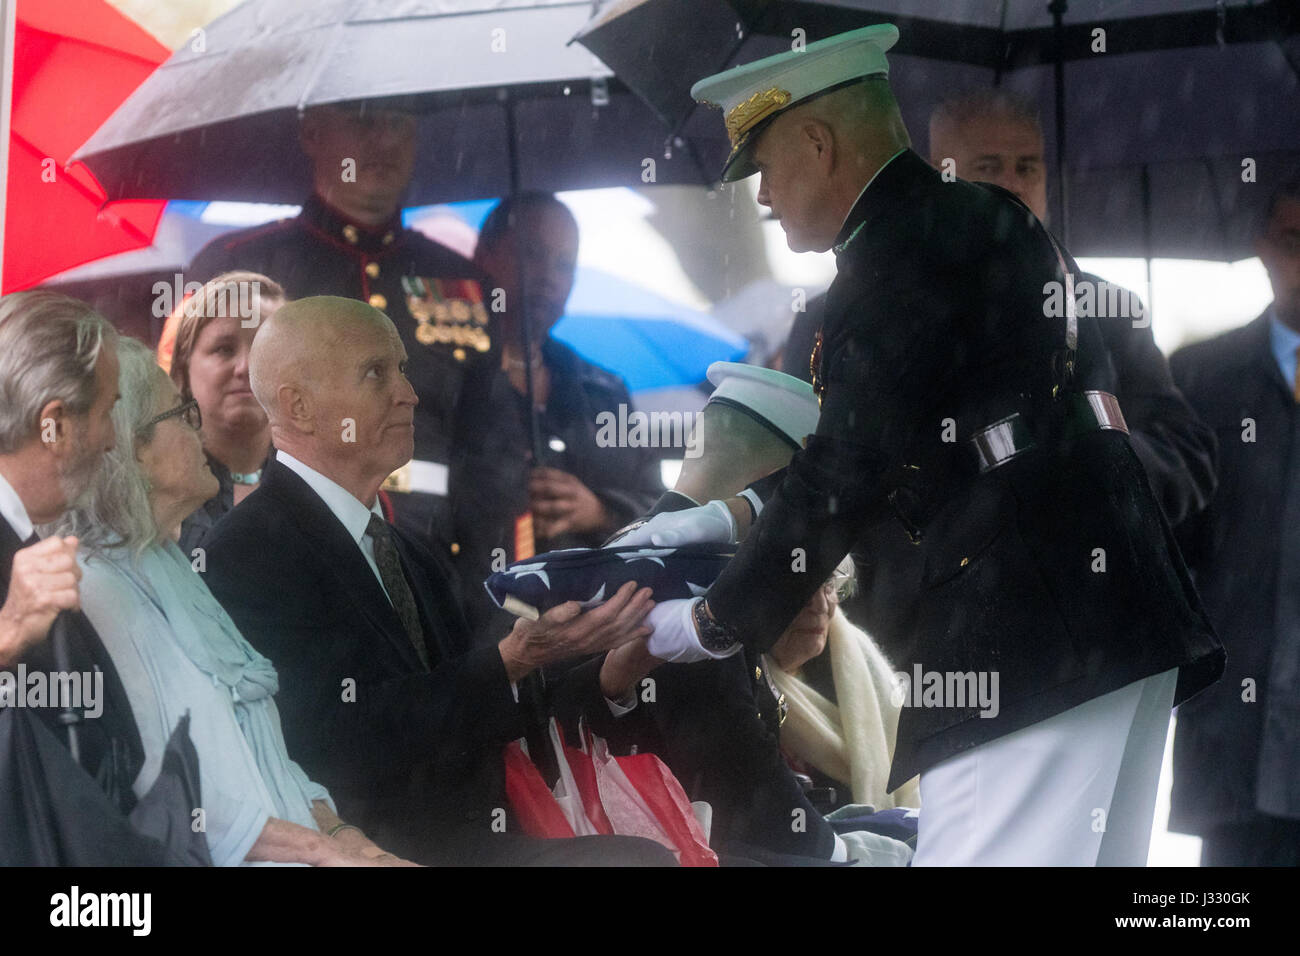 David Glenn, son of former astronaut and U.S. Senator John Glenn receives the folded American flag from the Commandant of the U.S. Marine Corps, General Robert B. Neller, during a graveside interment ceremony at Arlington National Cemetery on Thursday, April 6, 2017 in Virginia. He was the first American to orbit Earth on Feb. 20, 1962, in a five-hour flight aboard the Friendship 7 spacecraft. In 1998, Glenn broke another record by returning to space at the age of 77 on the Space Shuttle Discovery. Photo Credit: (NASA/Aubrey Gemignani) Stock Photo